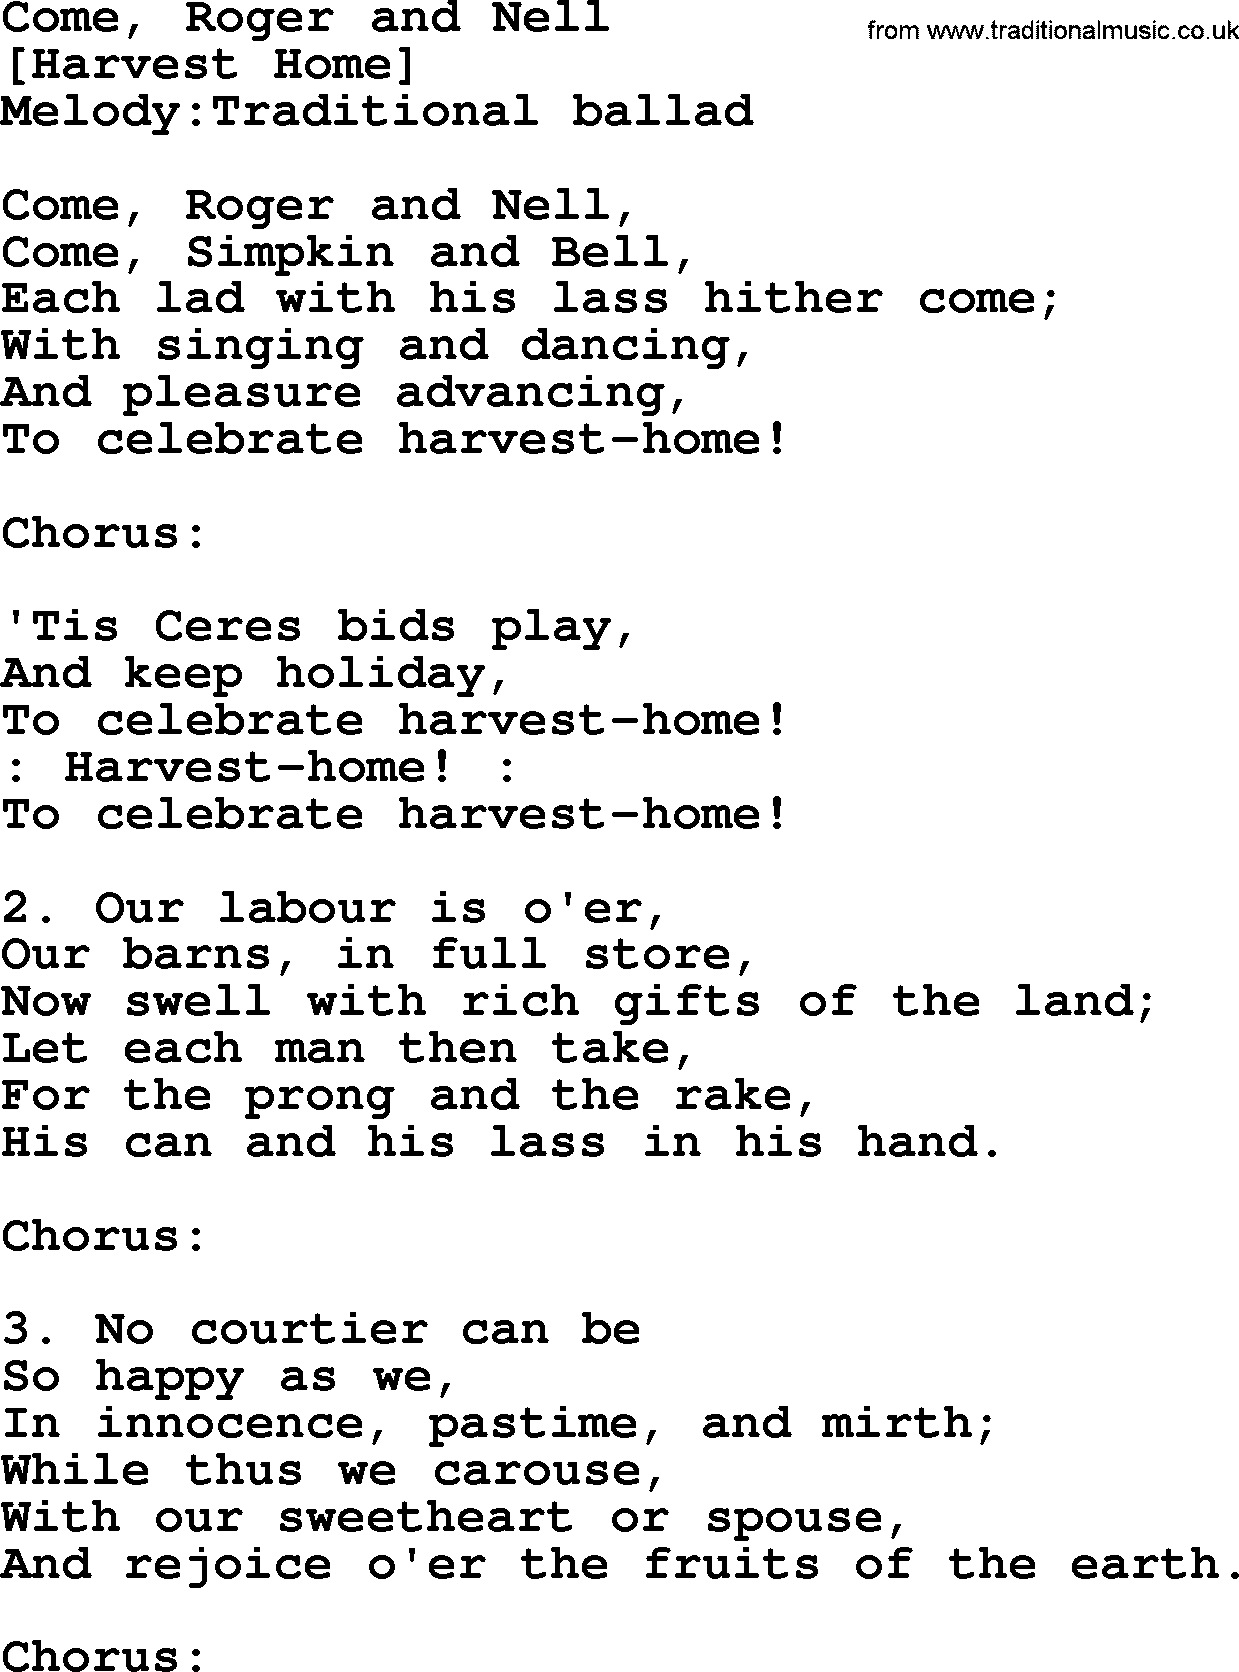 Old English Song: Come, Roger And Nell lyrics